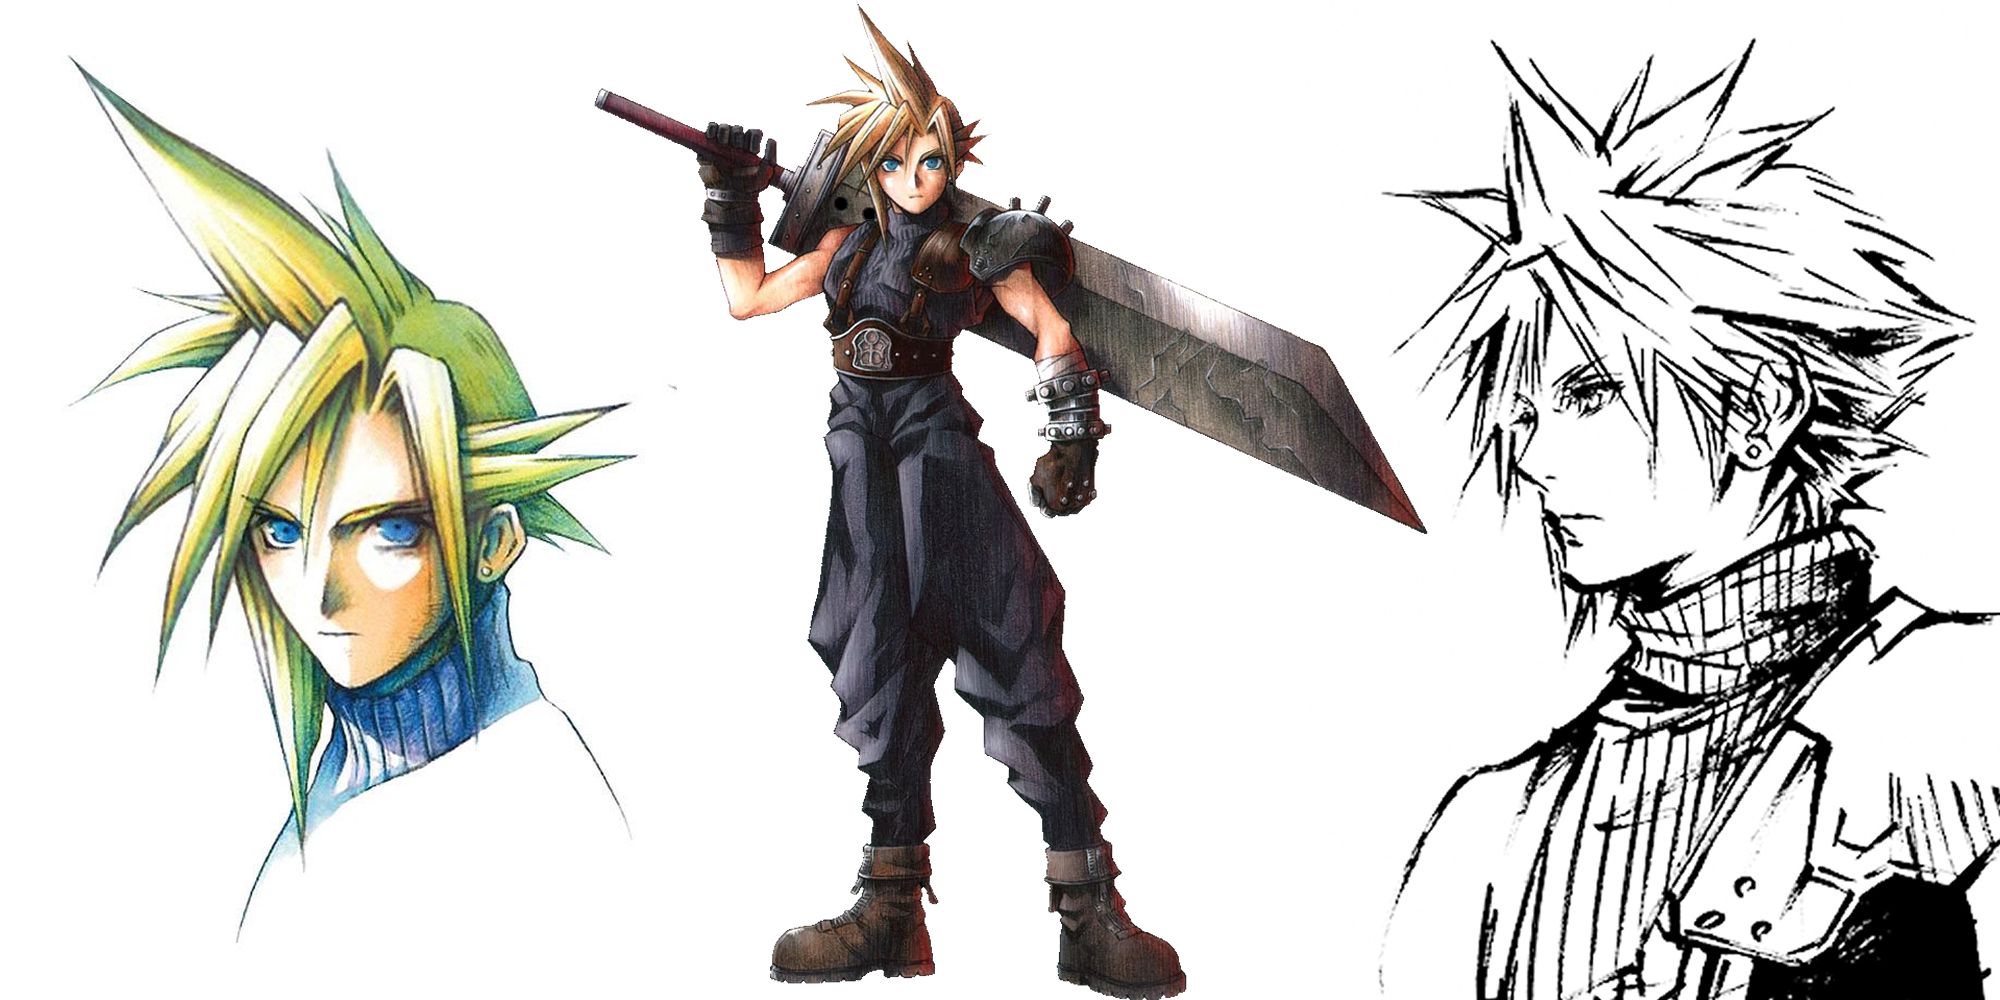 A Split Image Depicting Concept Art Of Cloud From Final Fantasy 7